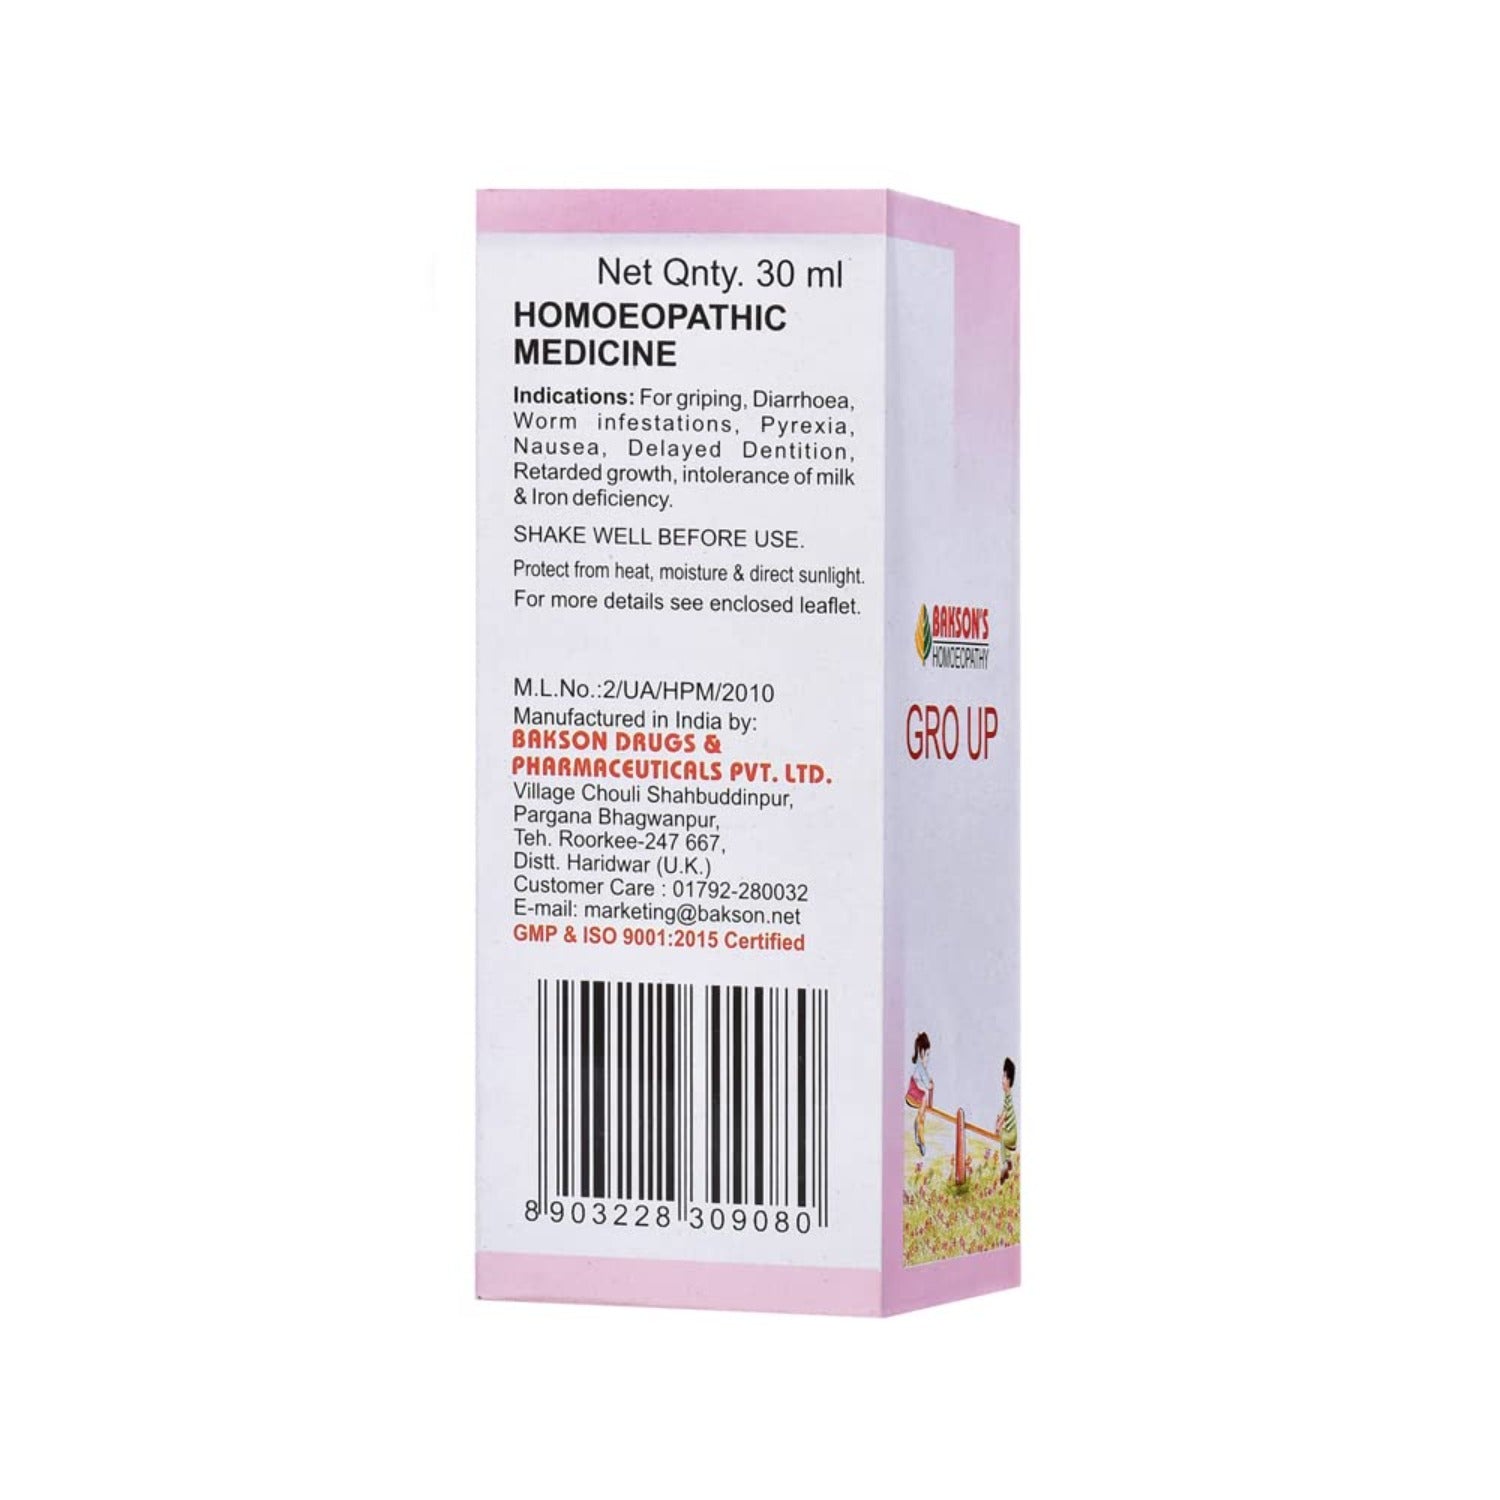 Bakson's Homoeopathy Gro Up Growth Promoter Drop 30ml